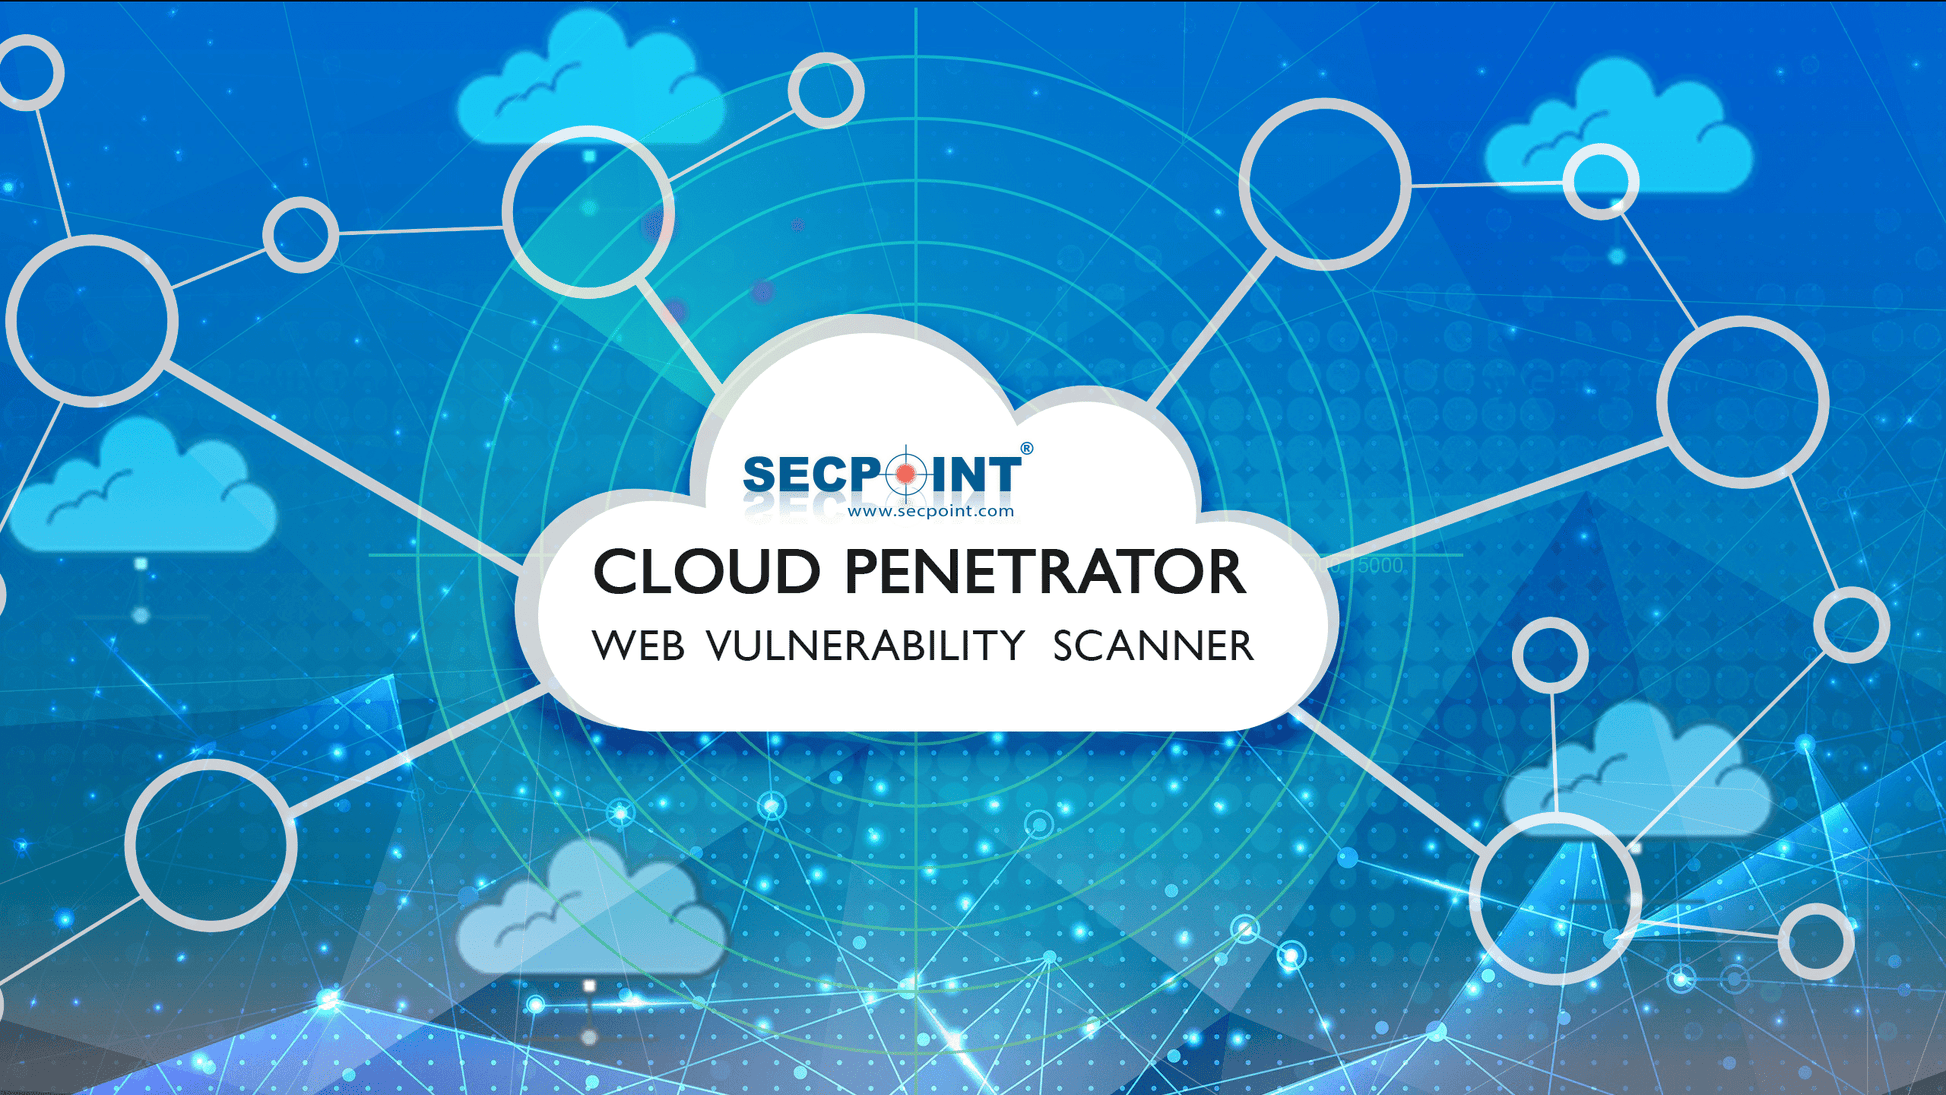 SecPoint Cloud Penetrator S9 - Vulnerability Scanning of 1 IP Static Scan License for 1 Year - SecPoint